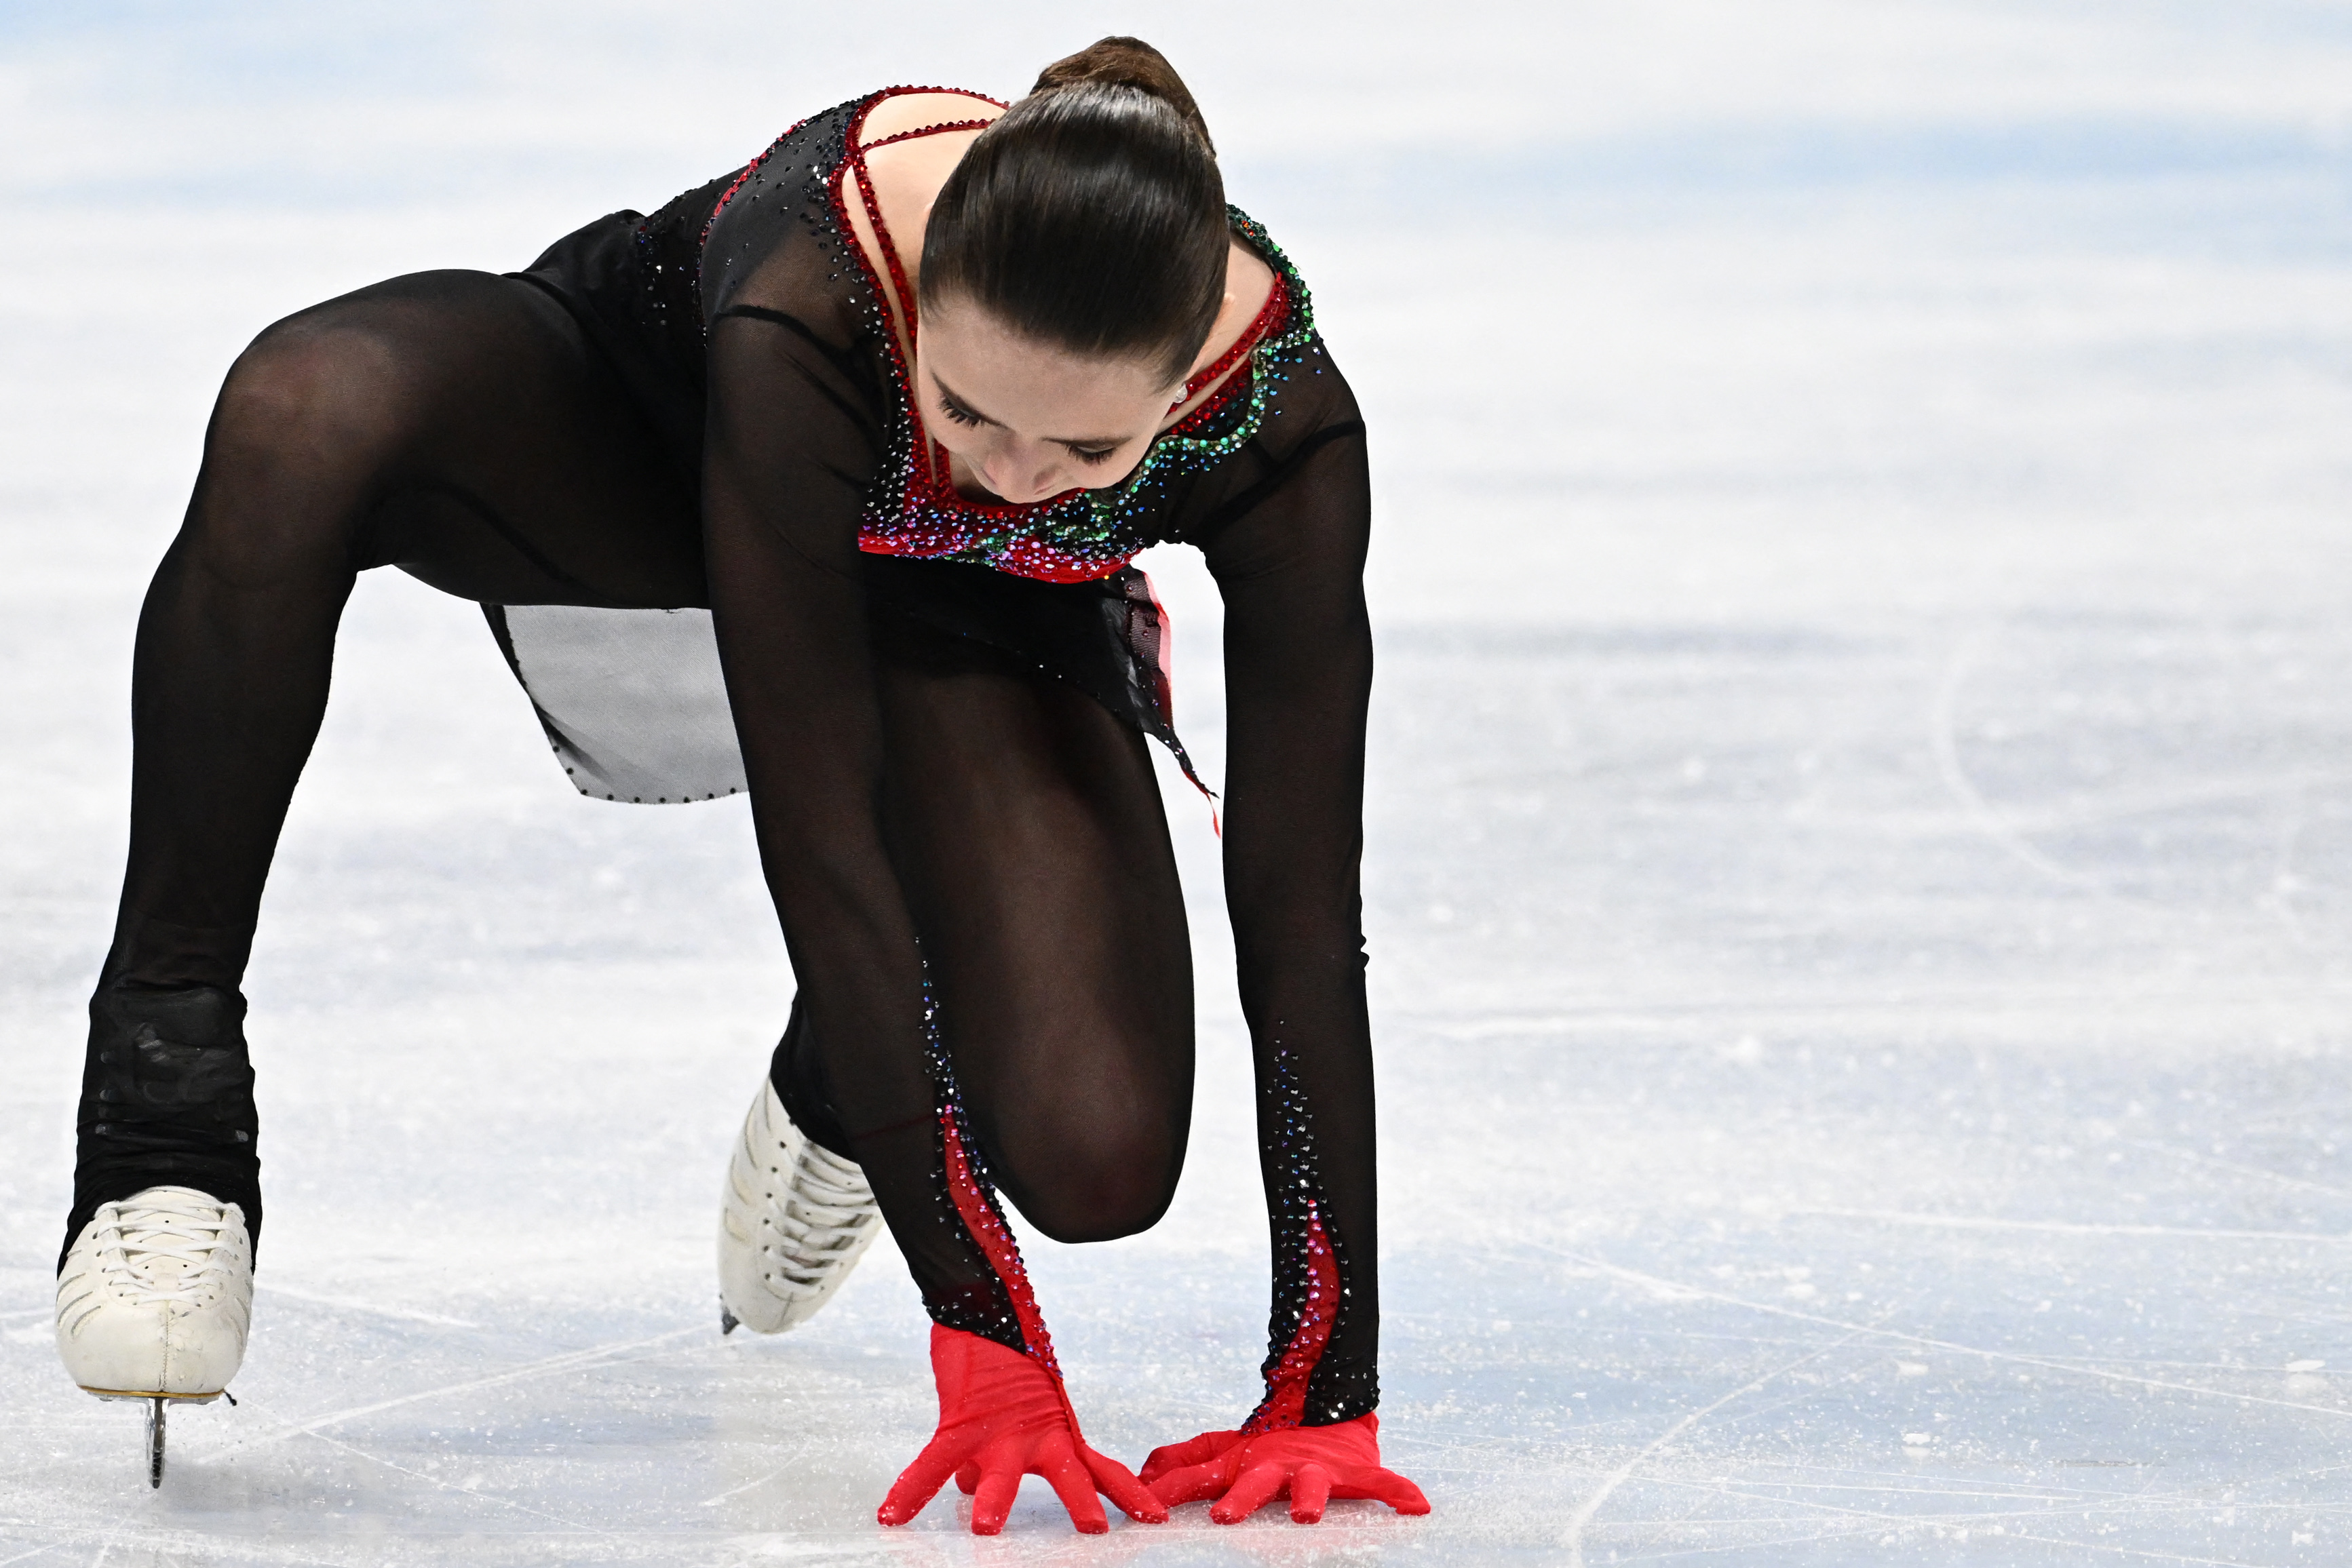 Womens Free Skate Ends in Tears and Drama at 2022 Winter Olympics